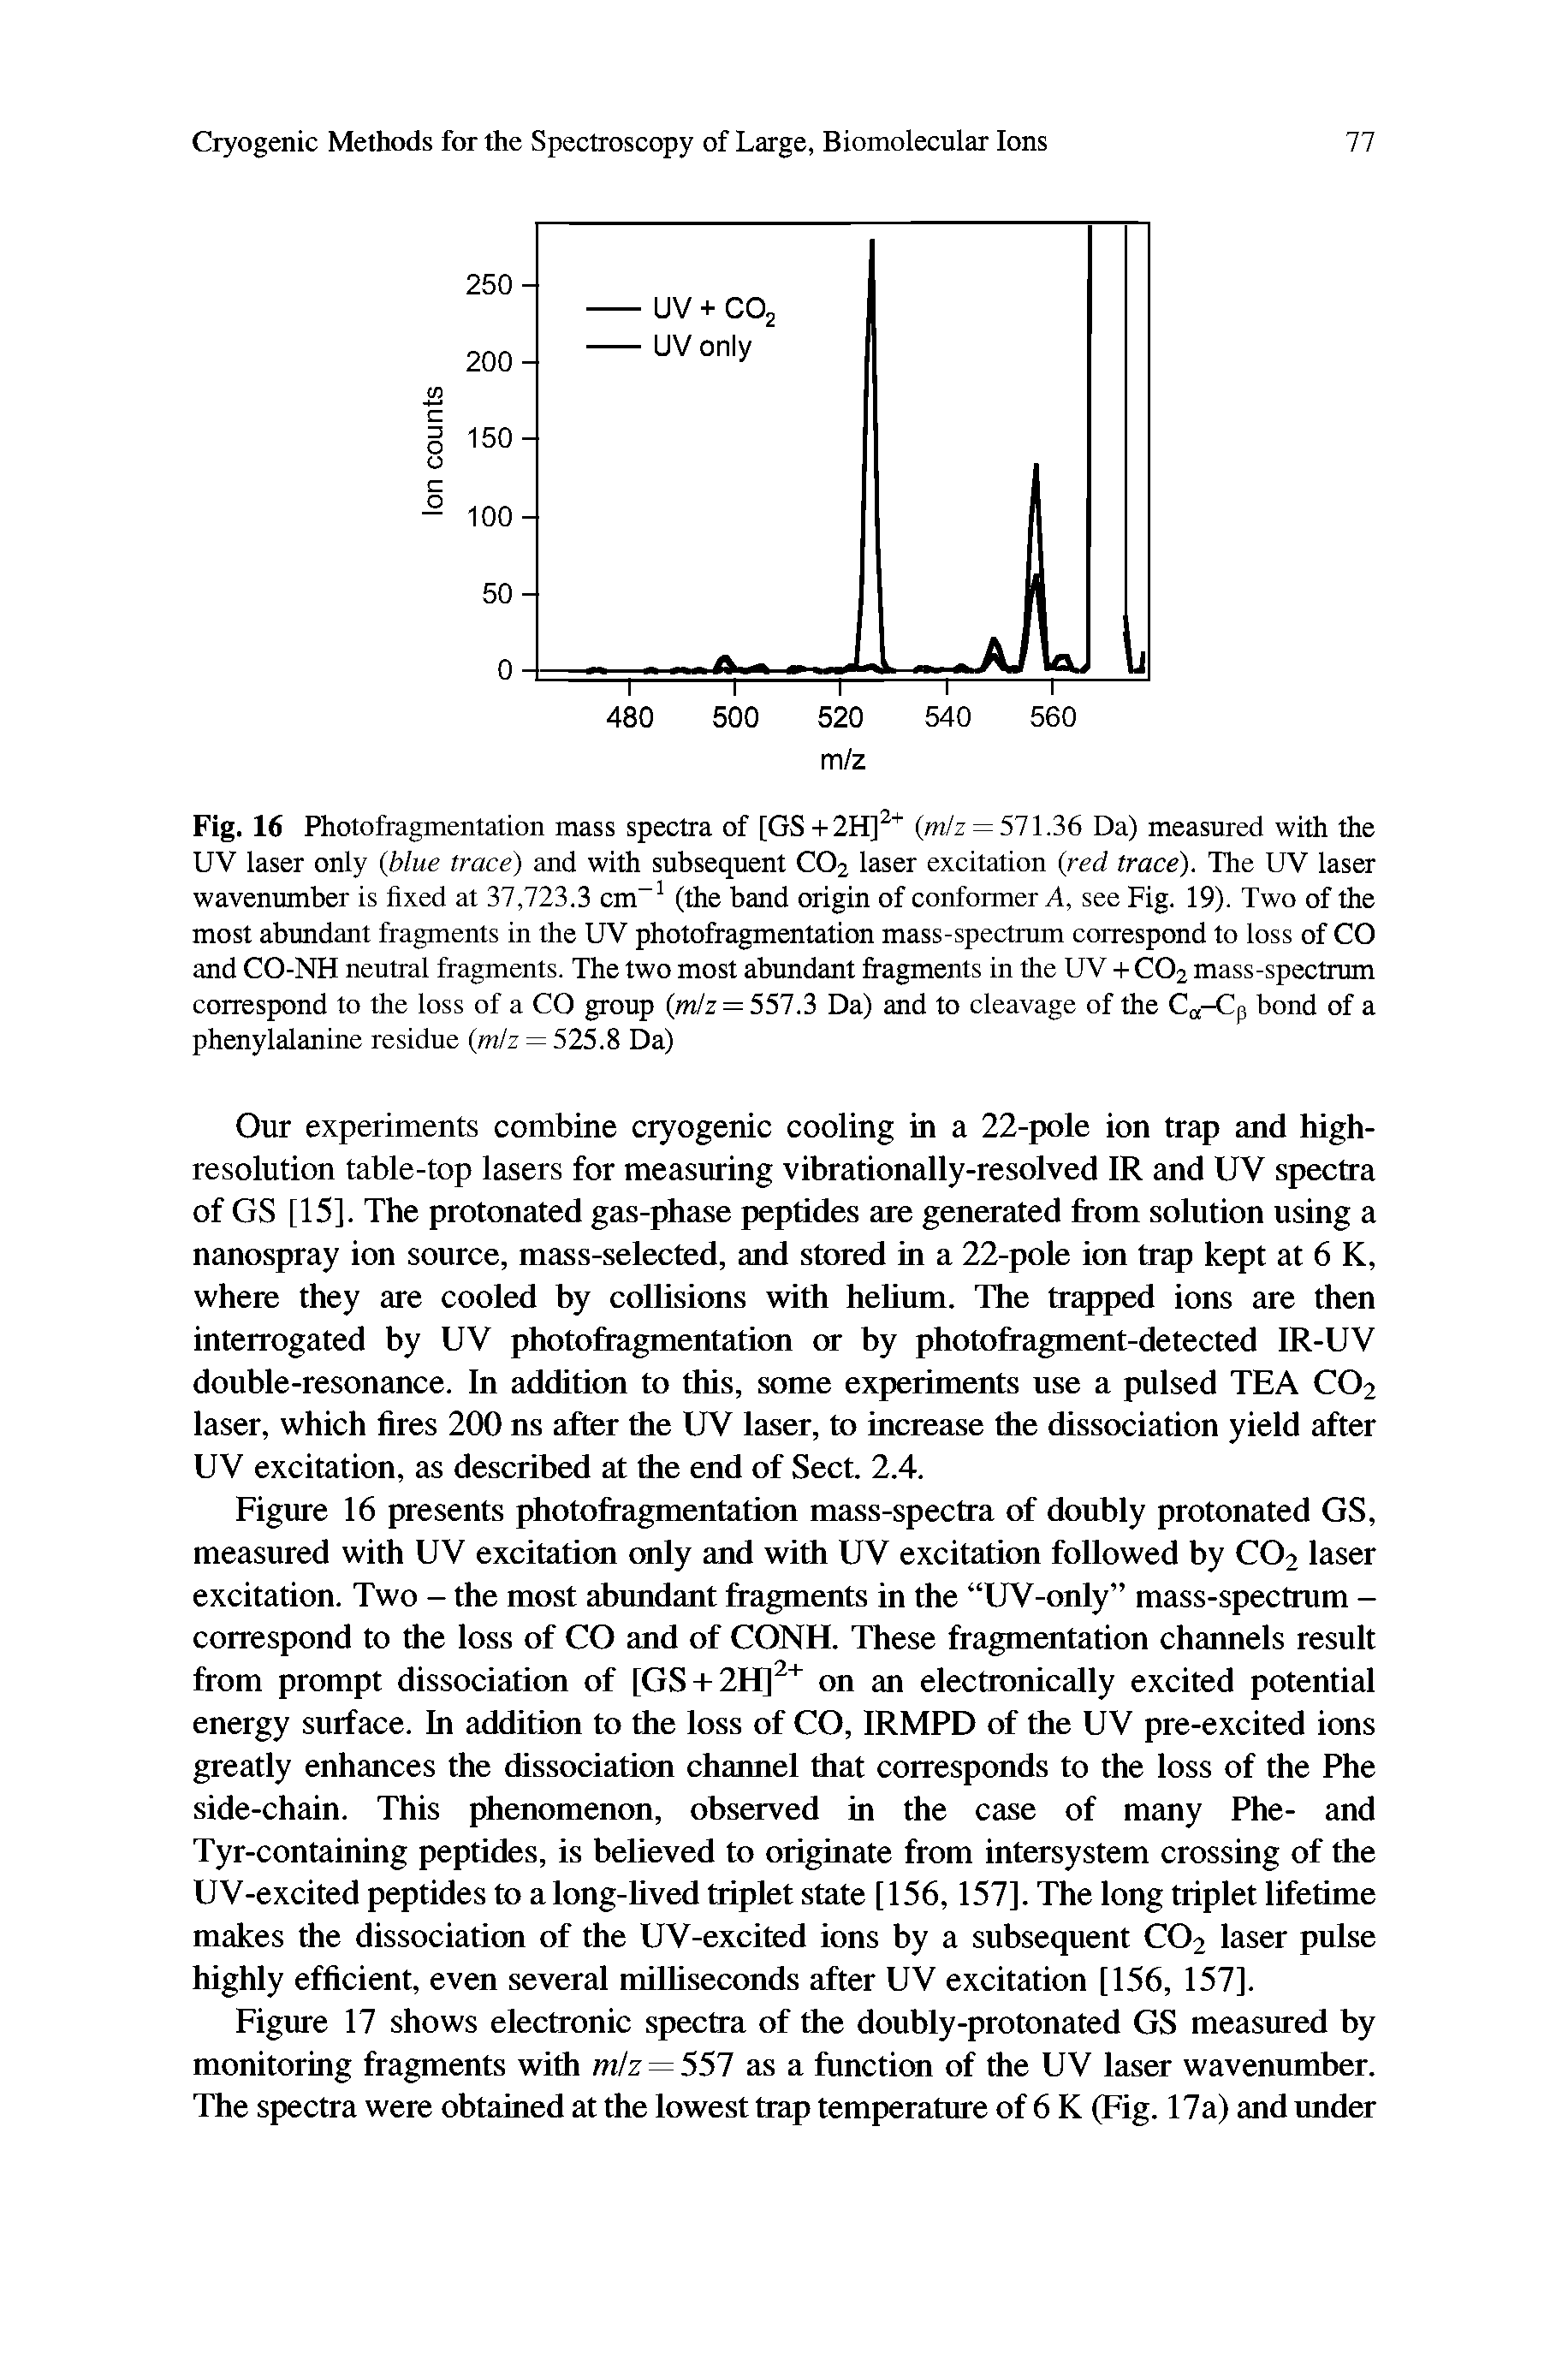 Fig. 16 Photofragmentation mass spectra of [GS+2H] (m/z = 571.36 Da) measured with the UV laser only (blue trace) and with subsequent CO2 laser excitation (red trace). The UV laser wavenumber is fixed at il.ll i. i cm (the band origin of conformer A, see Fig. 19). Two of the most abundant fragments in the UV photofragmentation mass-spectrum correspond to loss of CO and CO-NH neutral fragments. The two most abundant fi agments in the UV + CO2 mass-spectrum correspond to the loss of a CO group (w/z = 557.3 Da) and to cleavage of the C -Cp bond of a phenylalanine residue (m/z = 525.8 Da)...